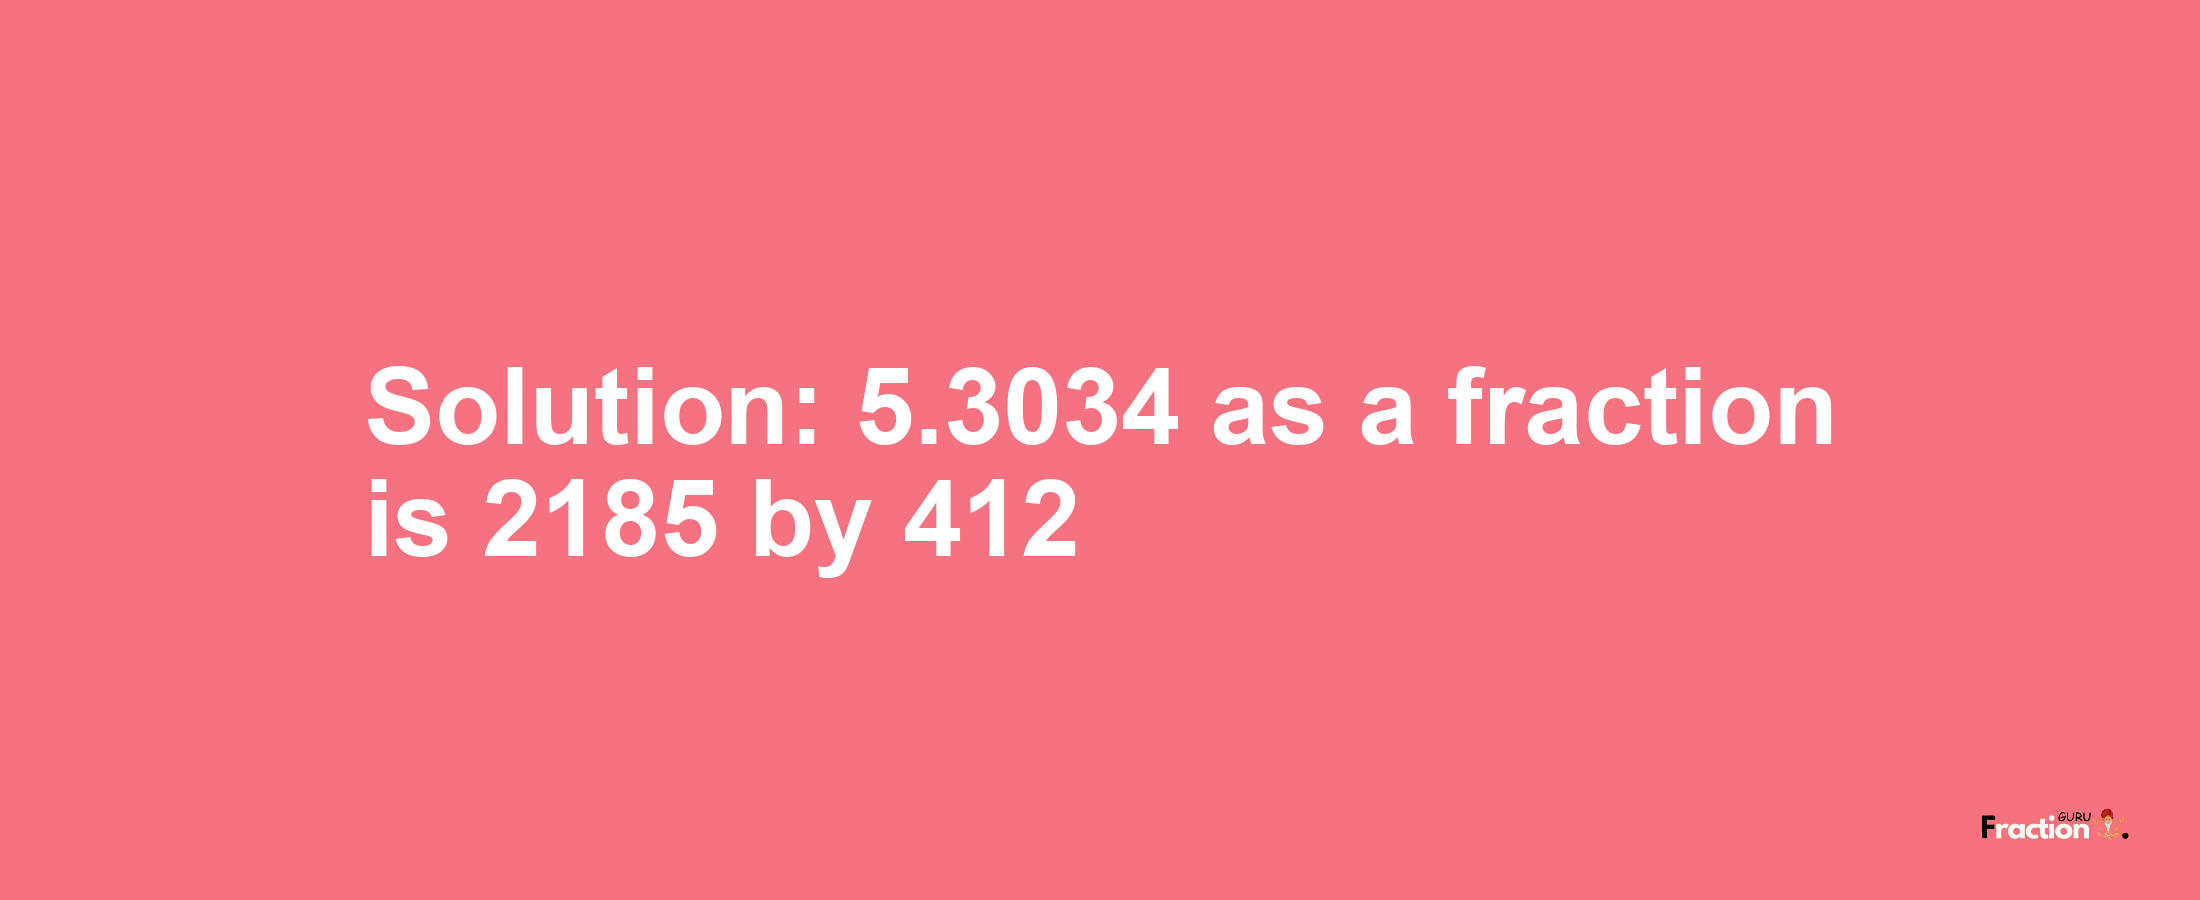 Solution:5.3034 as a fraction is 2185/412